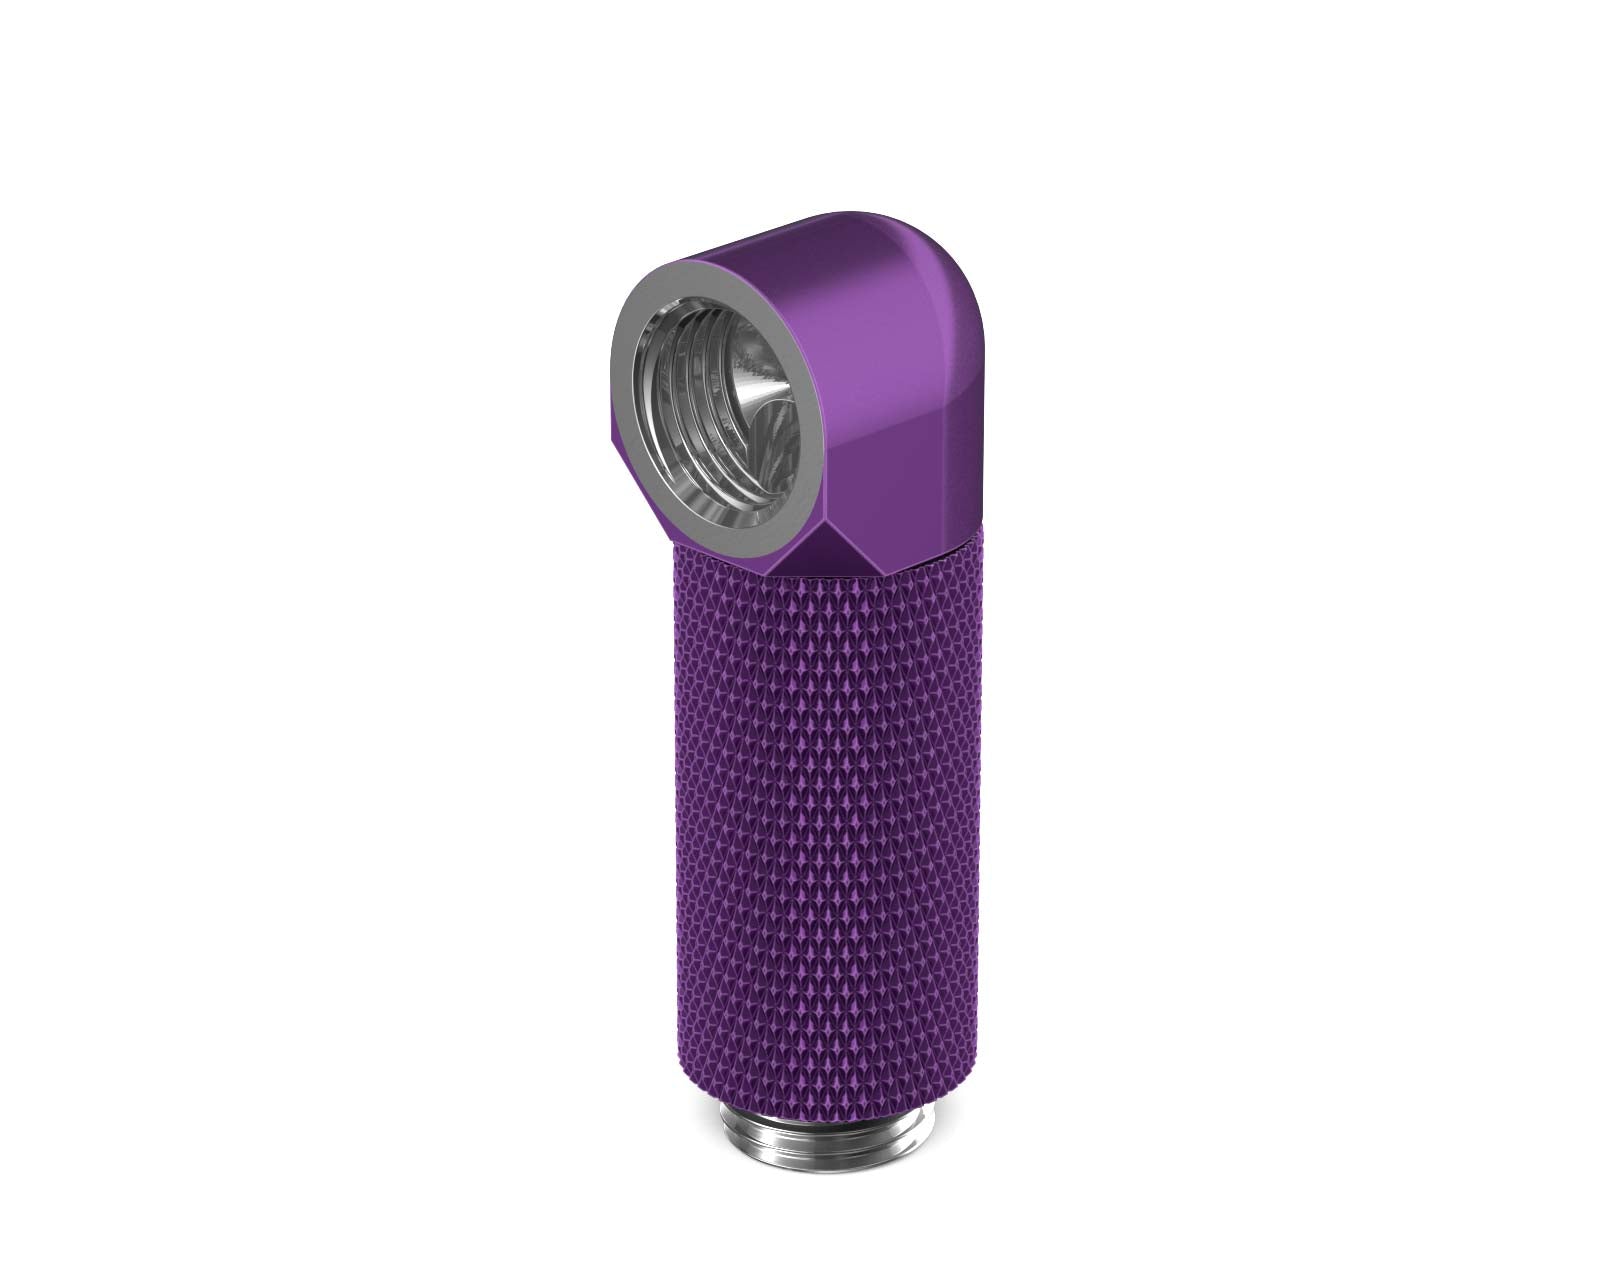 PrimoChill Male to Female G 1/4in. 90 Degree SX Rotary 35mm Extension Elbow Fitting - PrimoChill - KEEPING IT COOL Candy Purple